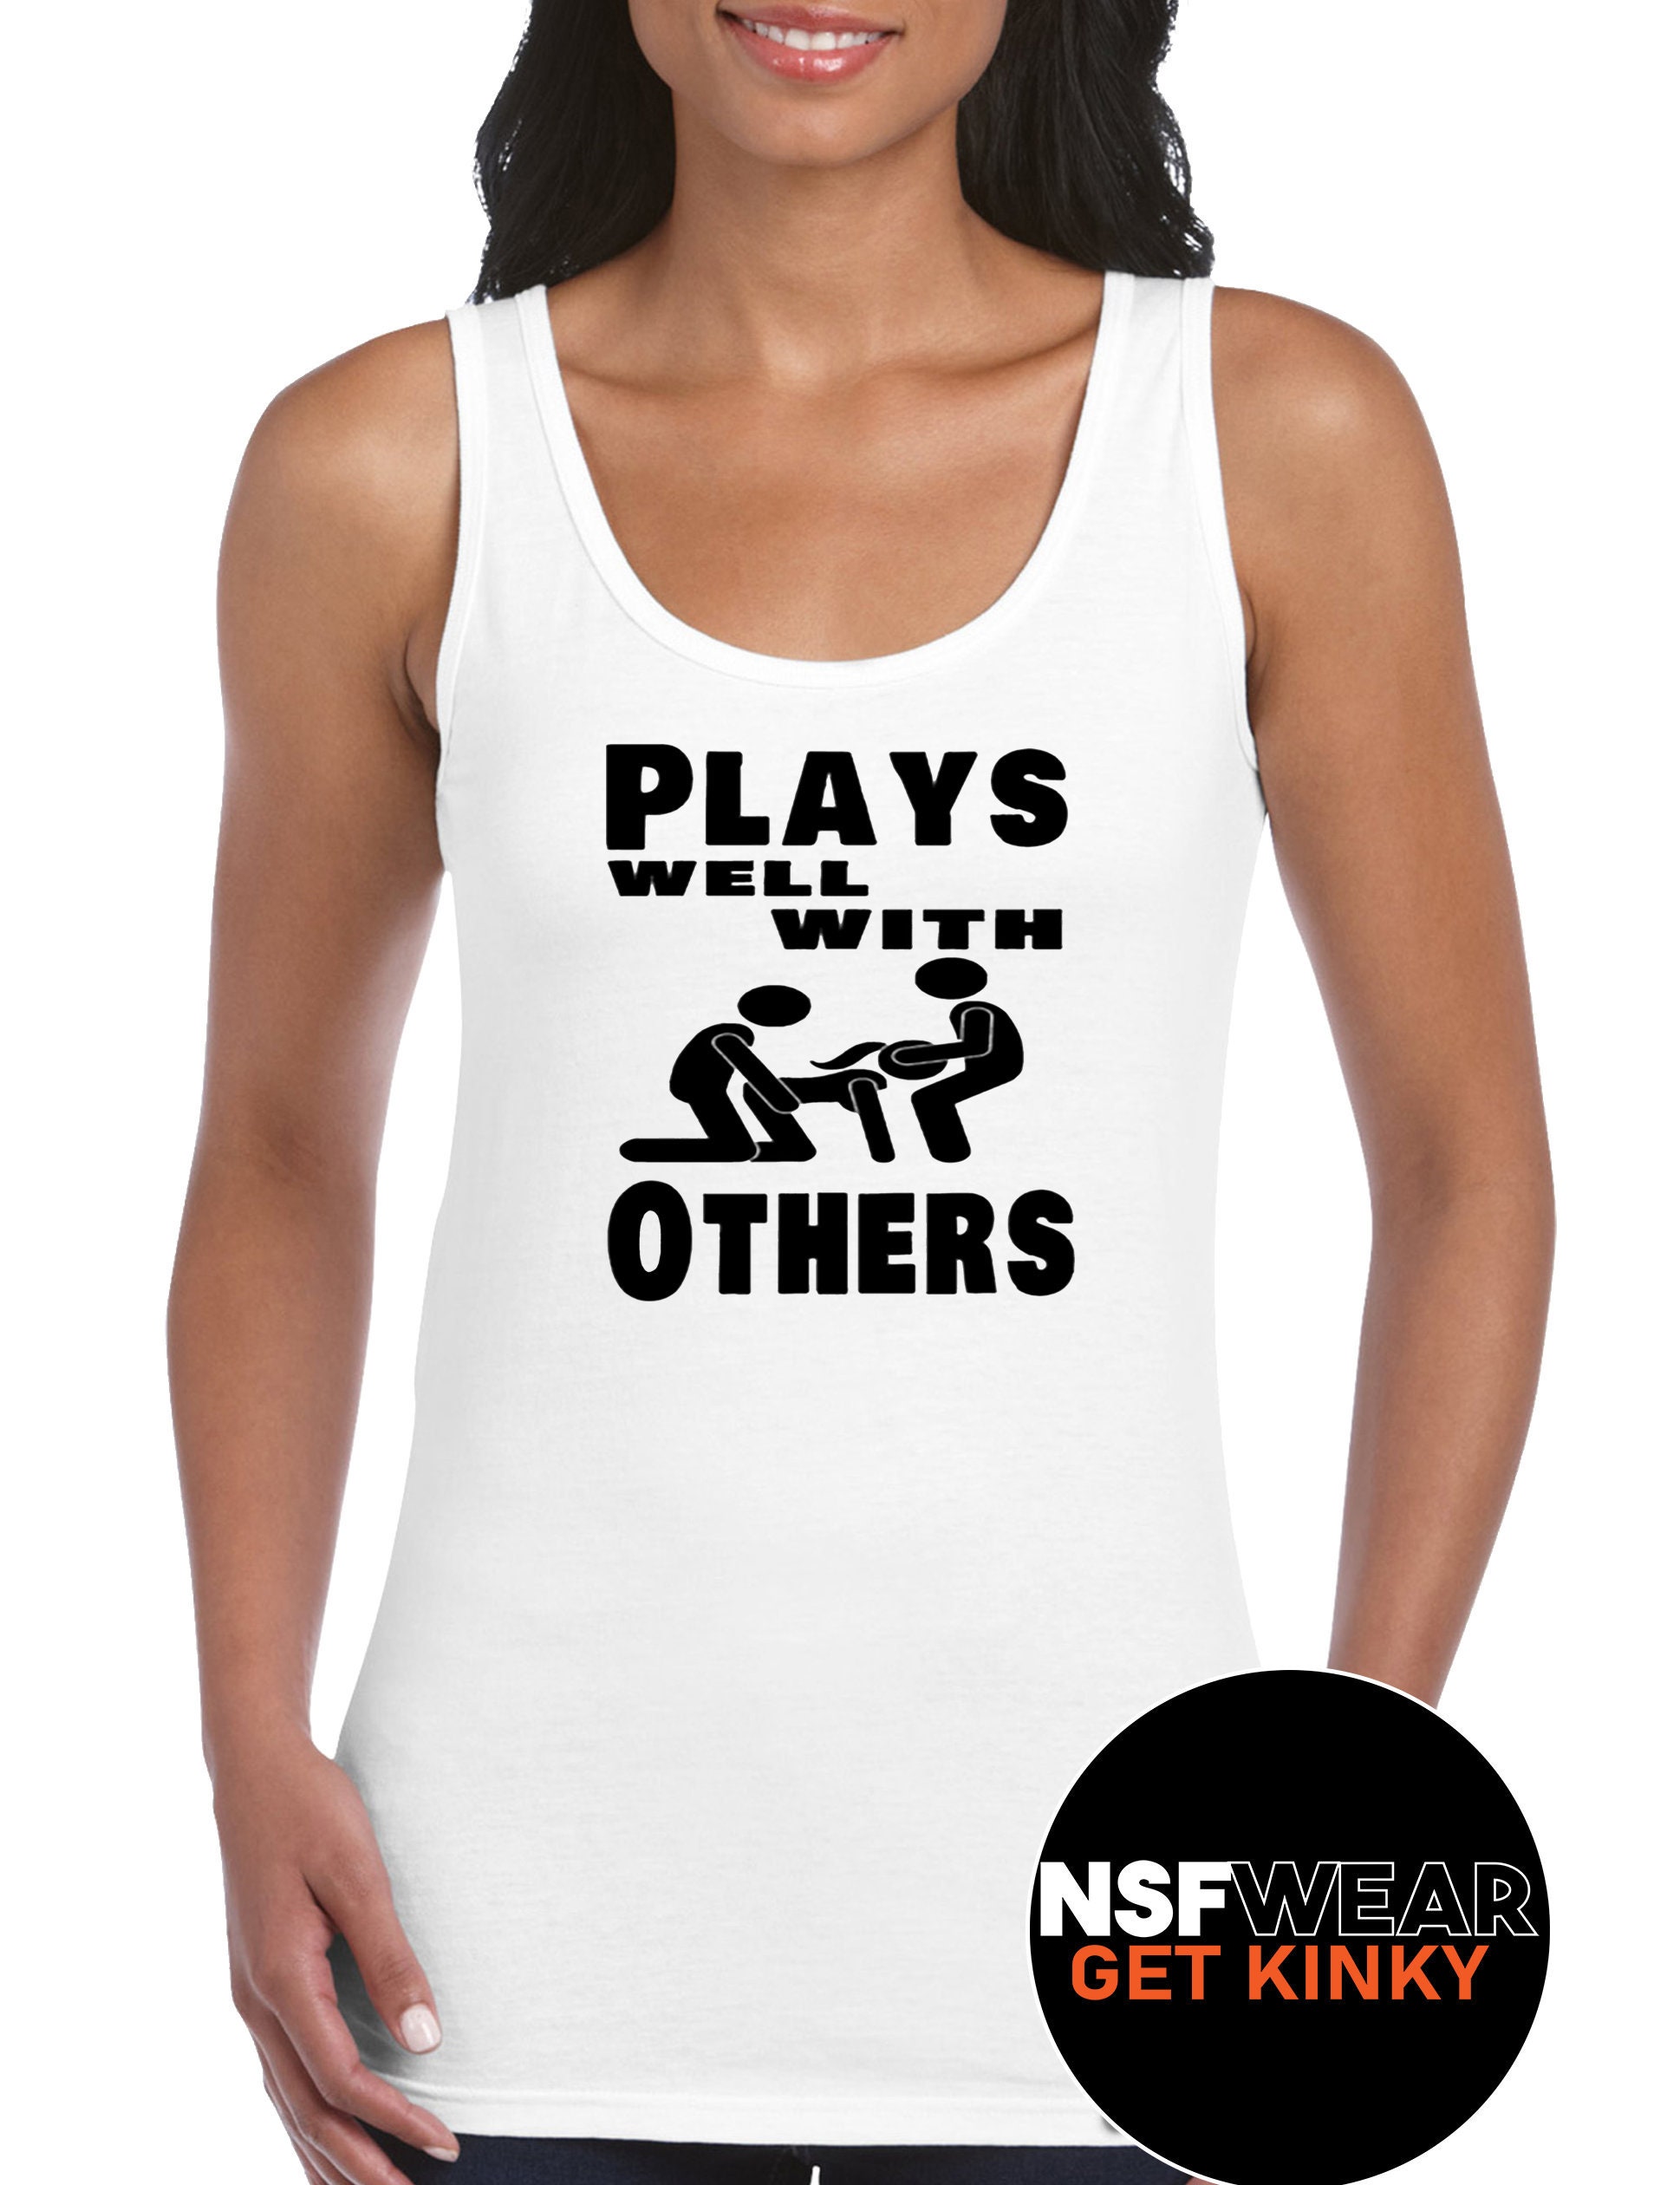 Plays Well With Others Tank T-shirt Cami or Apron Hotwife image